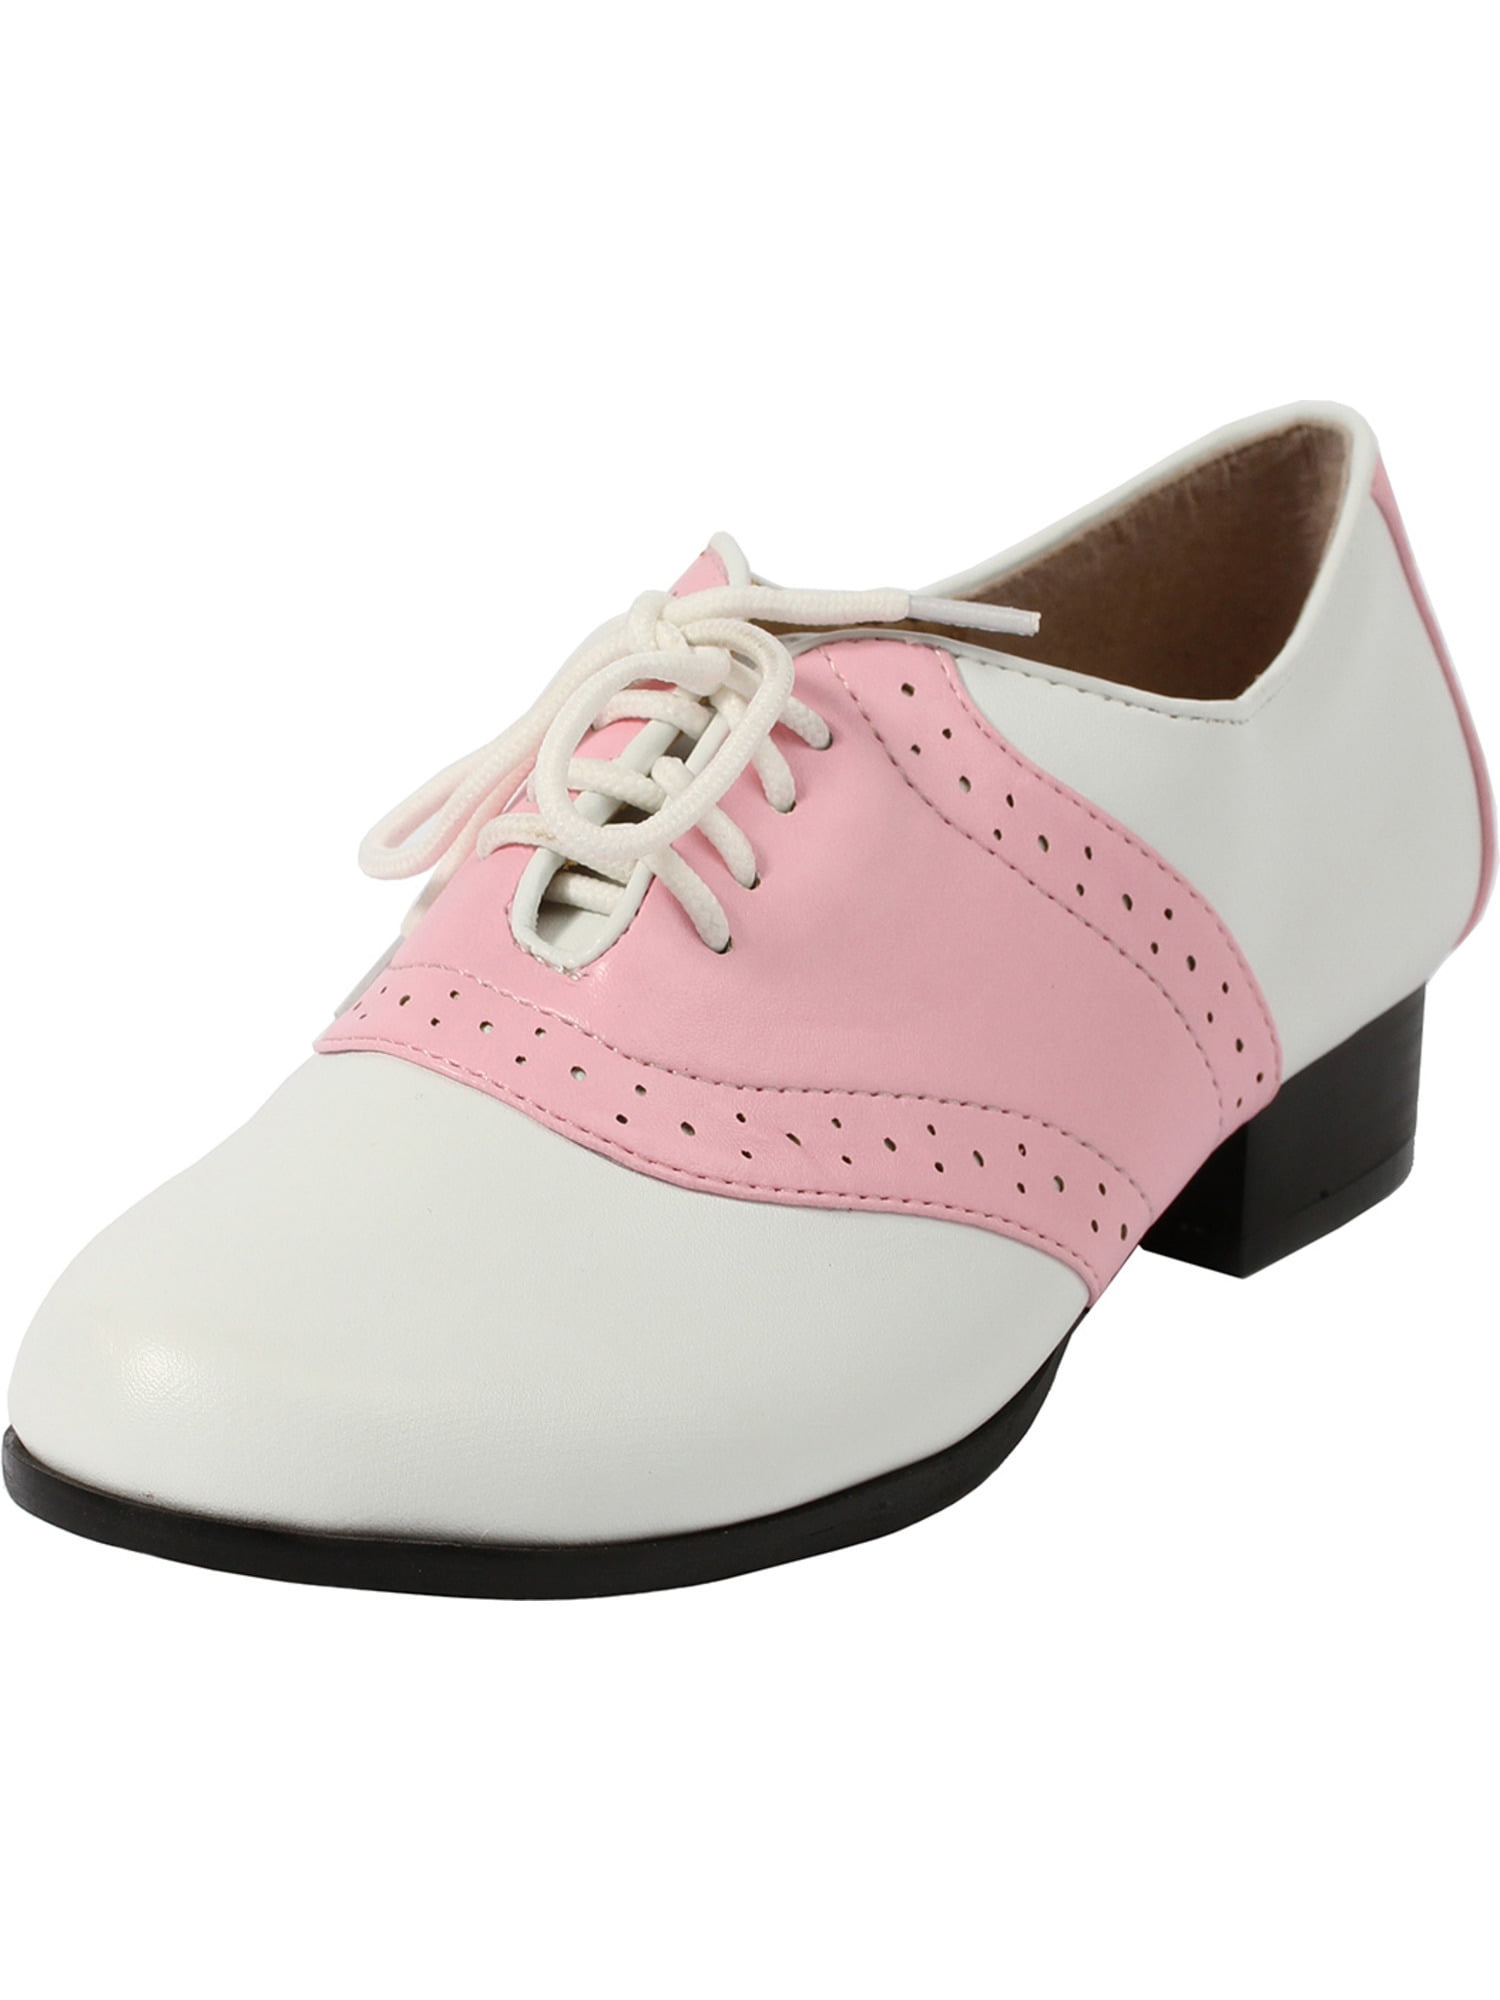 Women's Oxford Saddle Shoes Lace Up 